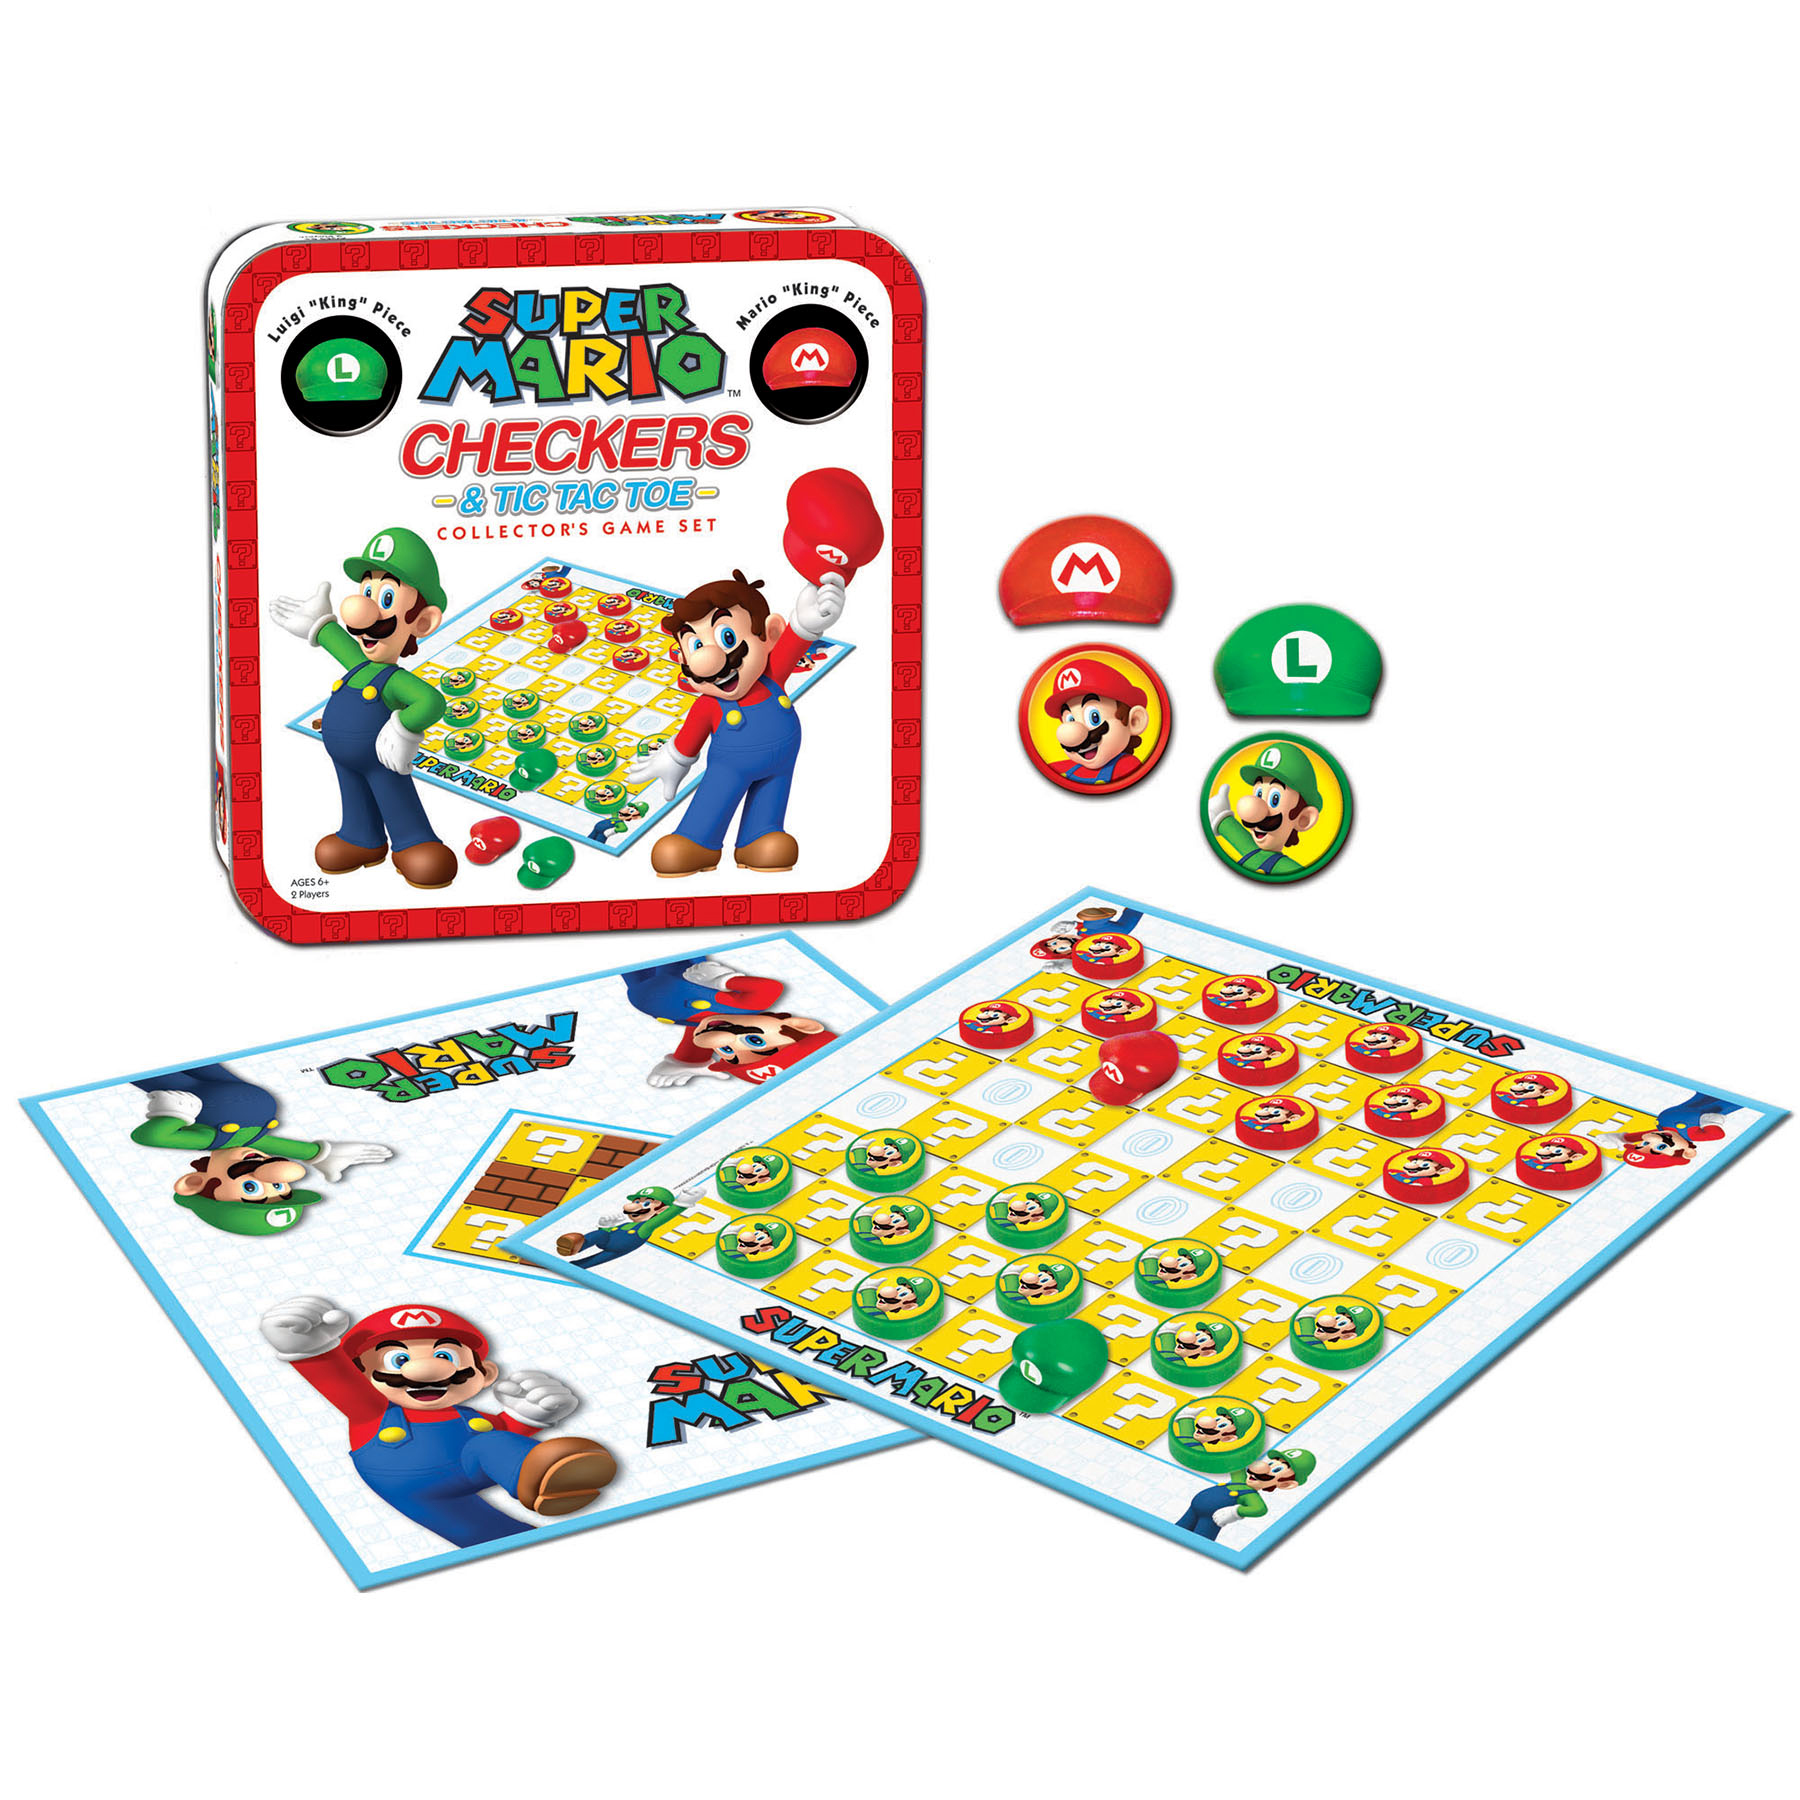 USAopoly Super Mario Checkers & Tic Tac Toe Collector's Game Set image number null